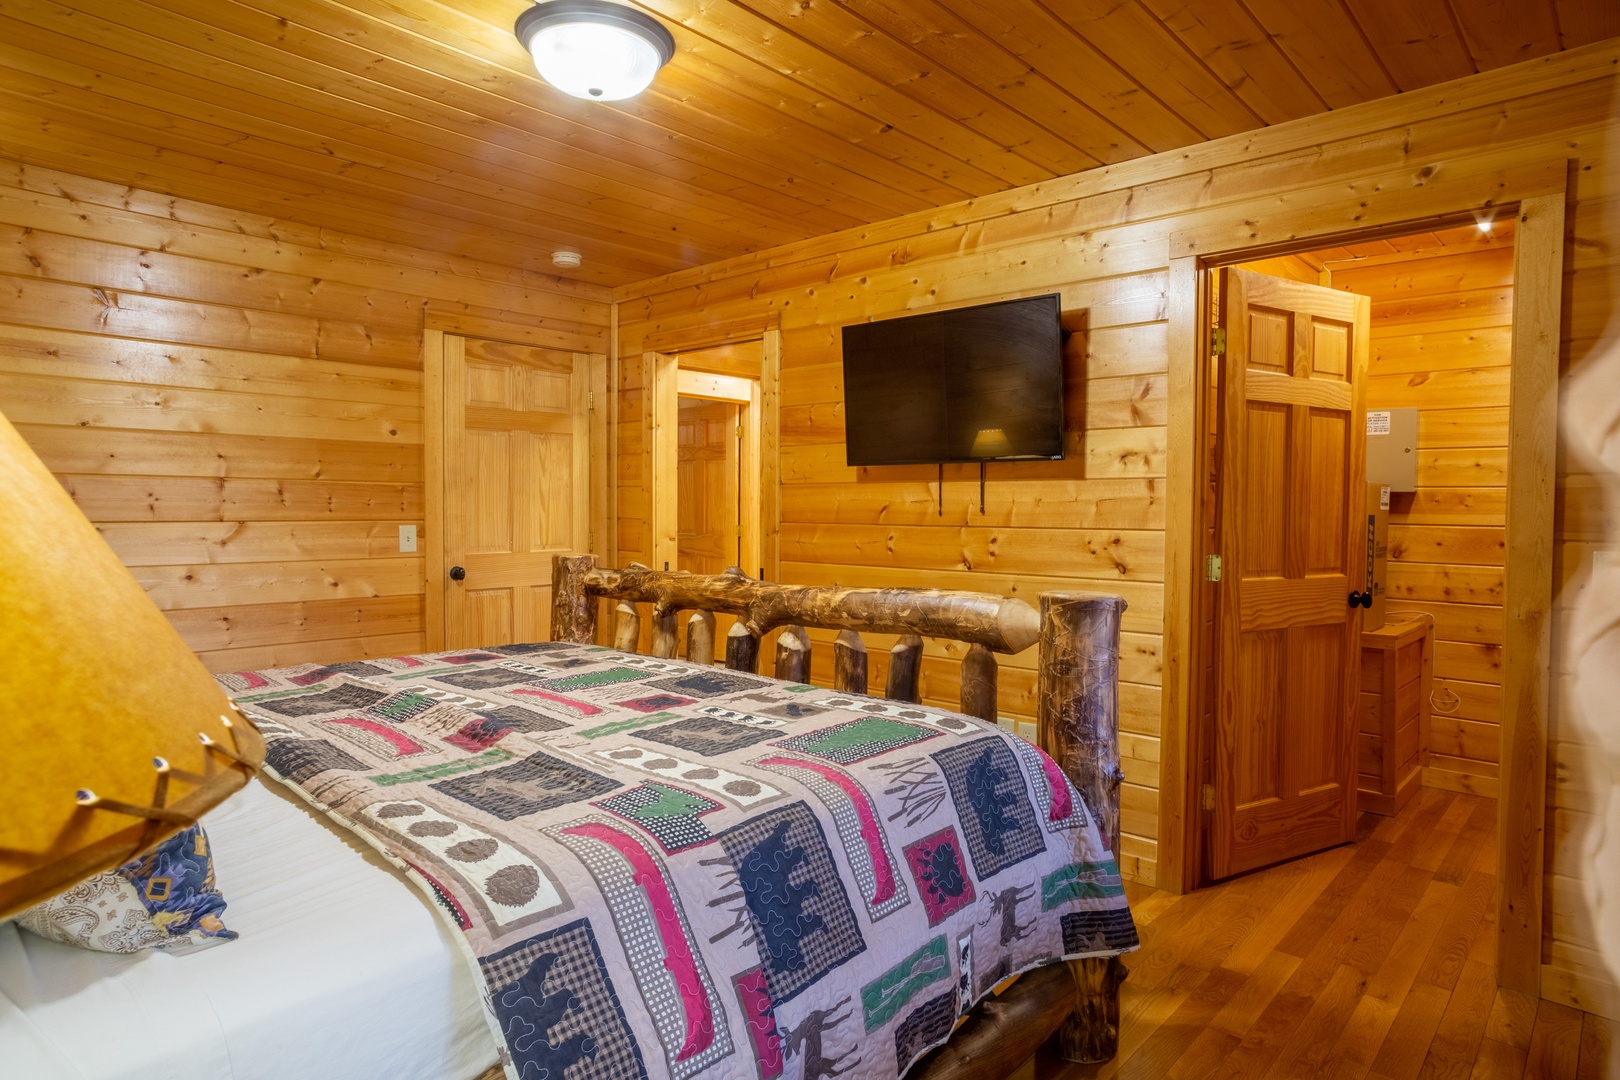 Flats screen tv in bedroom at 3 Crazy Cubs, a 5 bedroom cabin rental located in pigeon forge